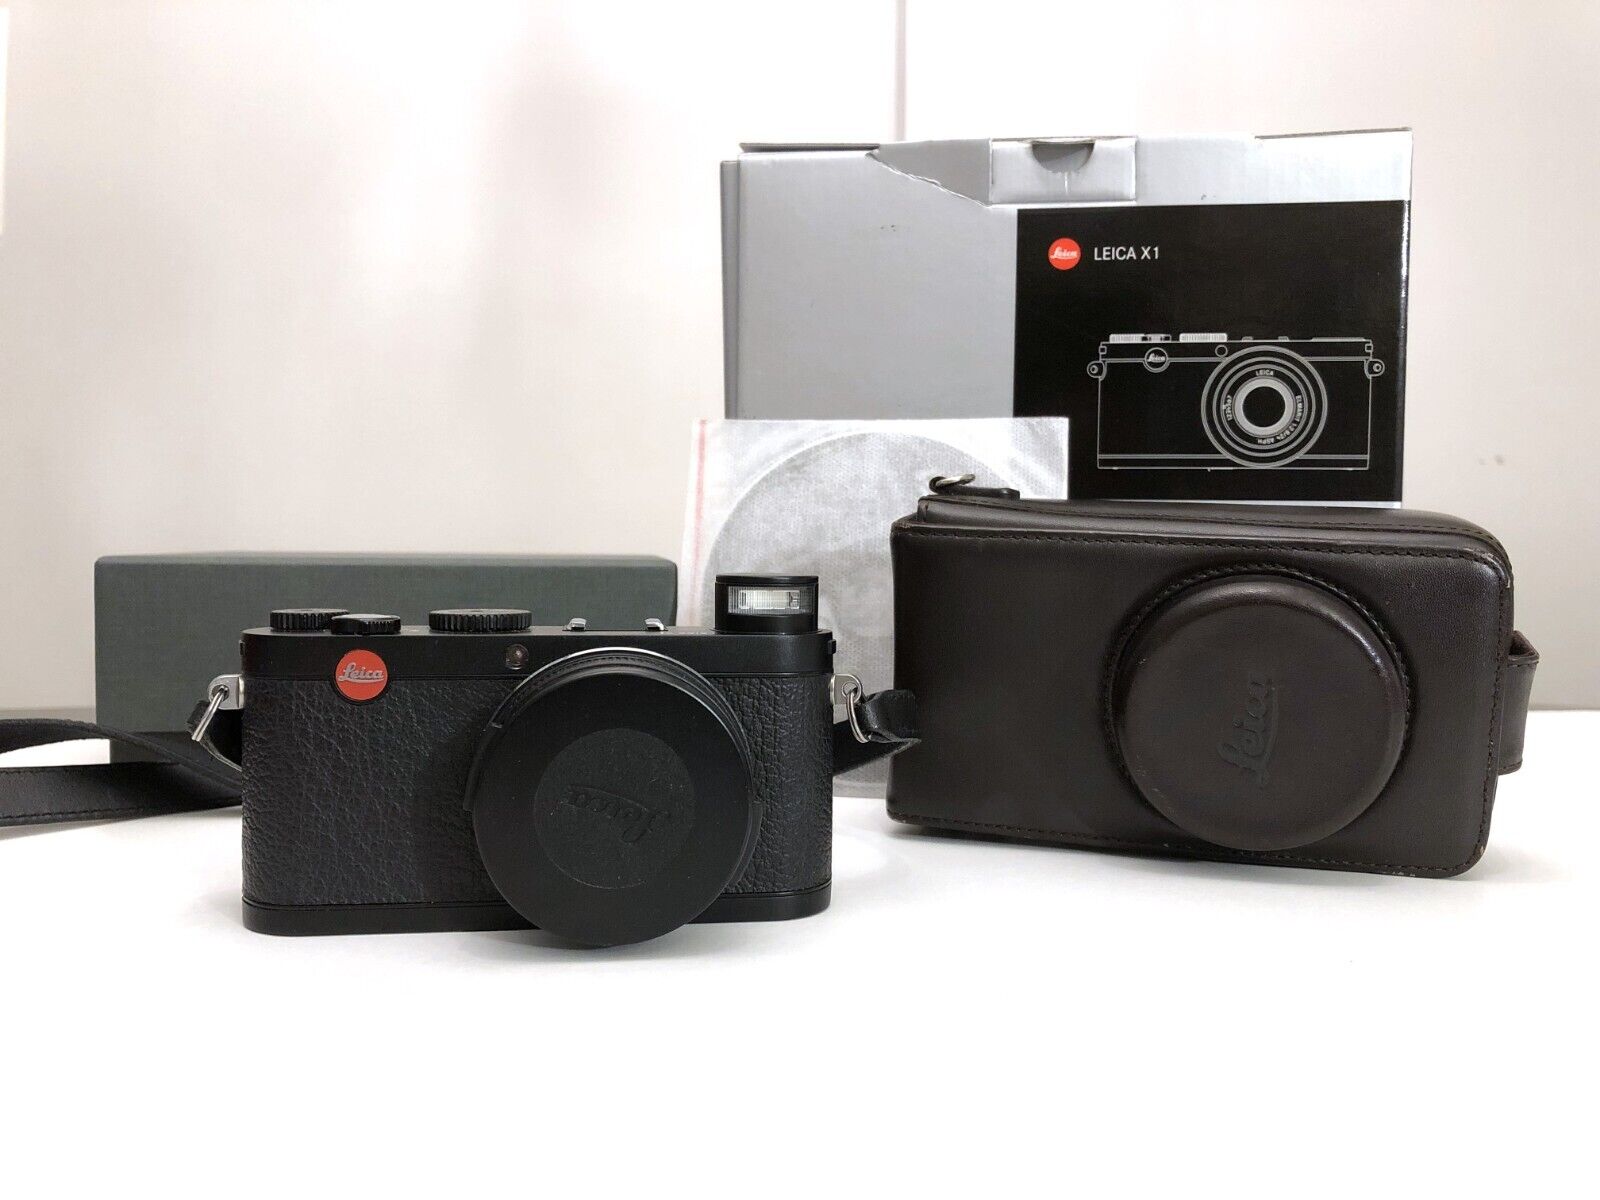 -- Like New -- Leica x1 Digital Camera with Leather Case